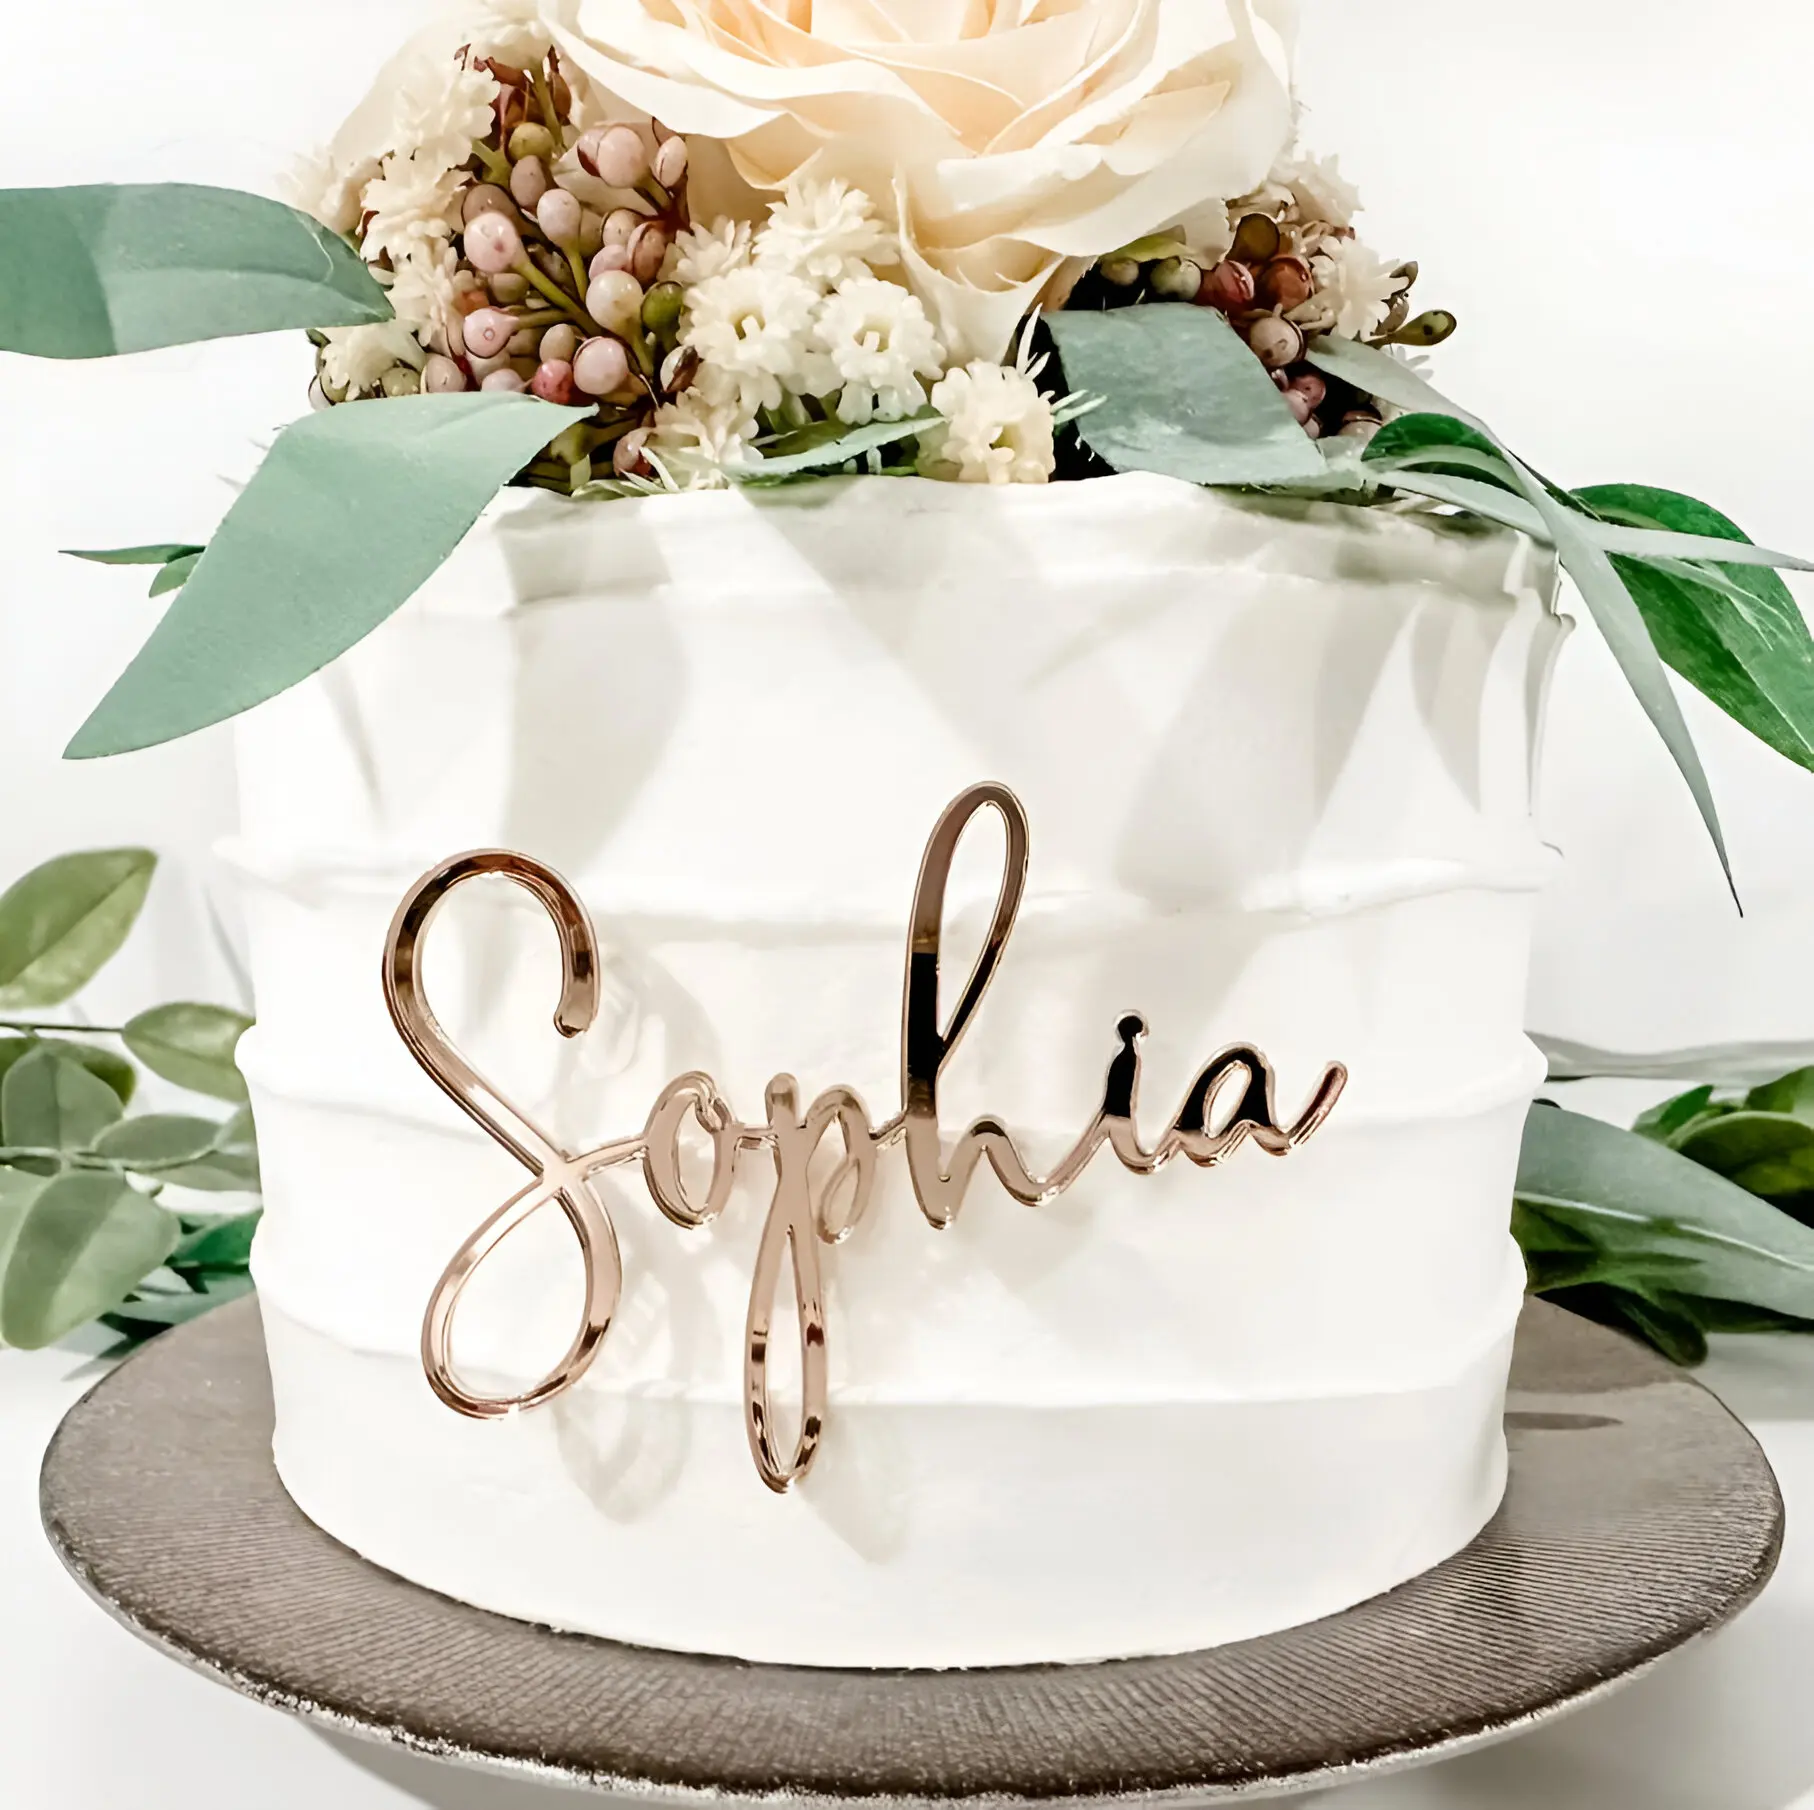 Acrylic Name Sign Cake Topper, Name Cake Charm Custom Cake Topper, Wedding Place Cards, Personalized Birthday Cake Topper